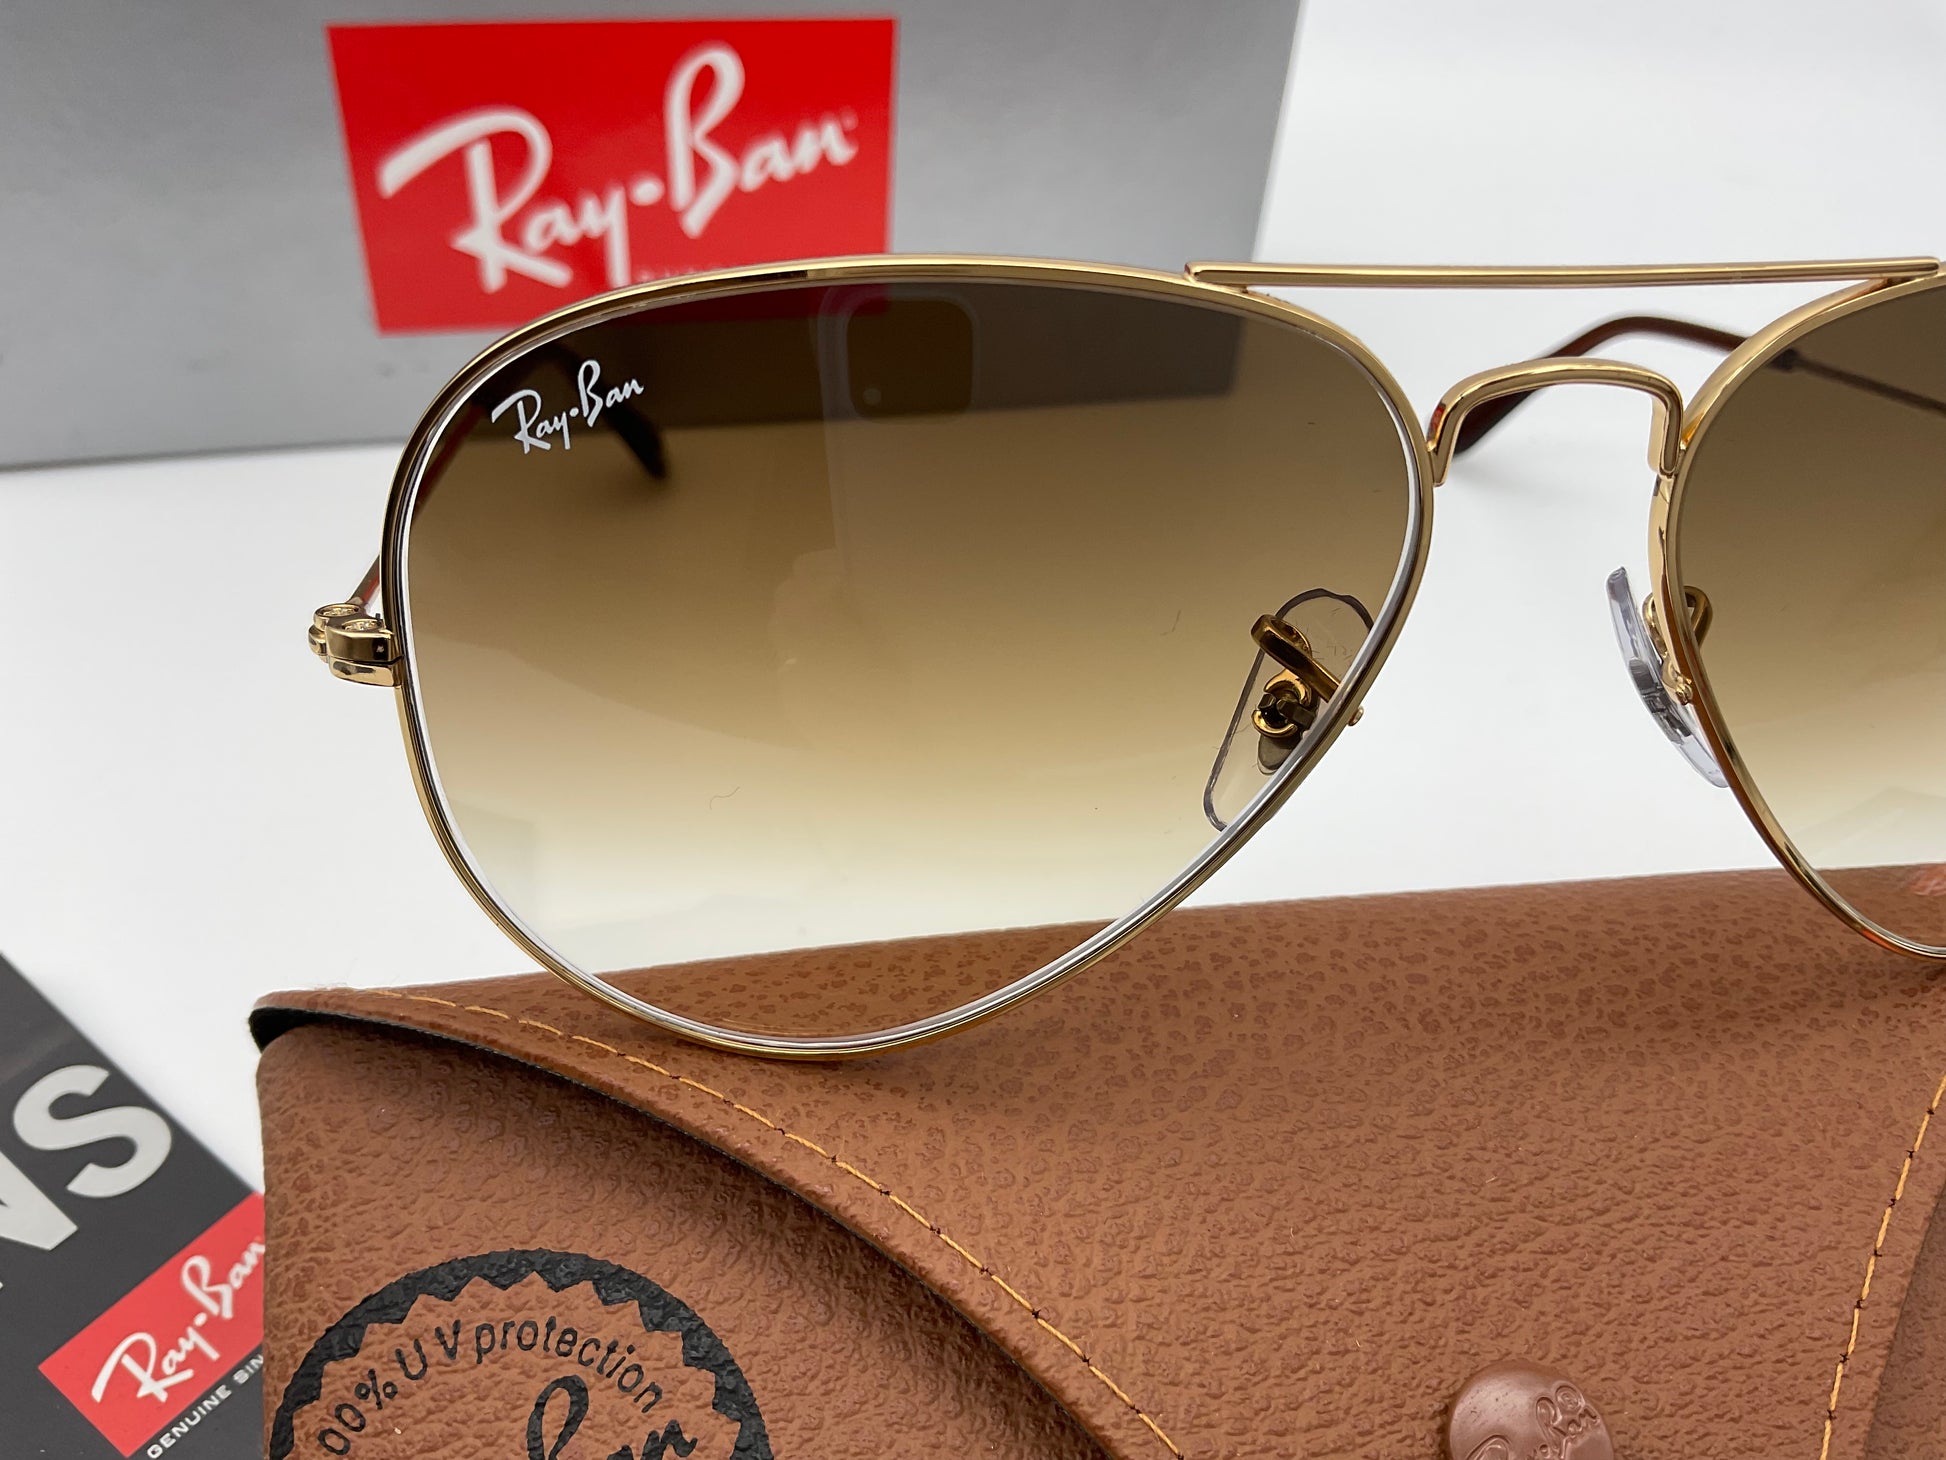 Sunglasses Ray-Ban AVIATOR 58mm RB3025 001/51 Gold Gradient Brown Clea –  Shade Review Store